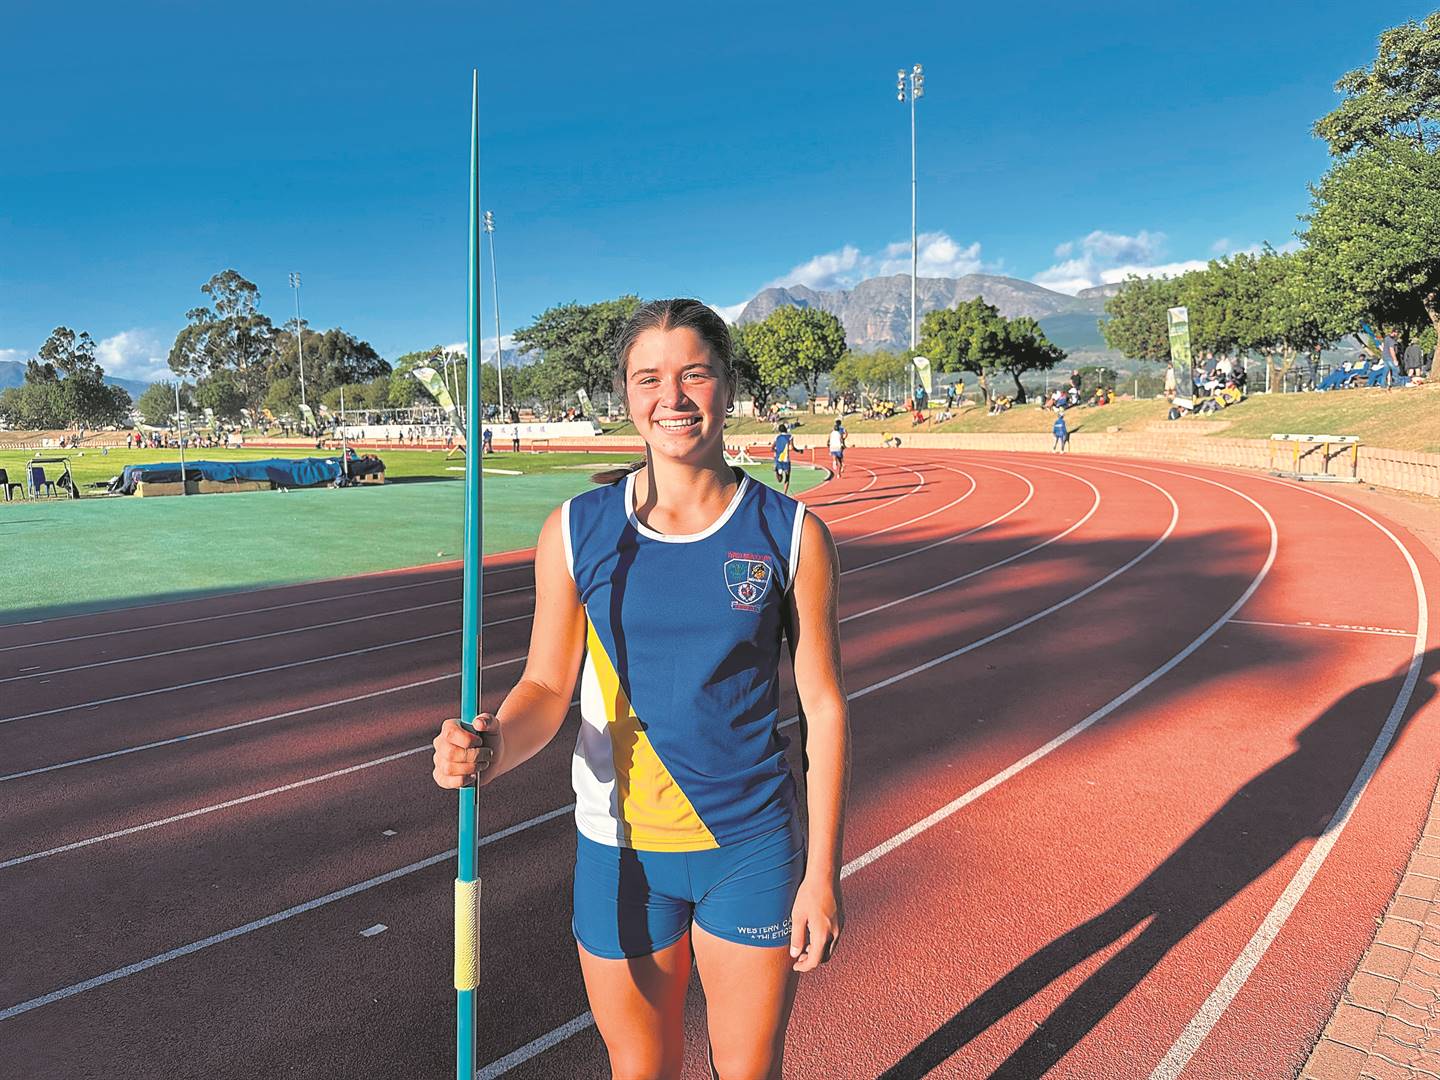 Nicola van der Merwe, a Western Cape and Boland athlete, broke the under-15 girls’ javelin record at the recent Autumn National School Sports Championship held in Paarl. The Grade 9 Rhenish Girls’ High School learner recorded a 53,36 m, breaking the record of 50,63 m set in 2016.